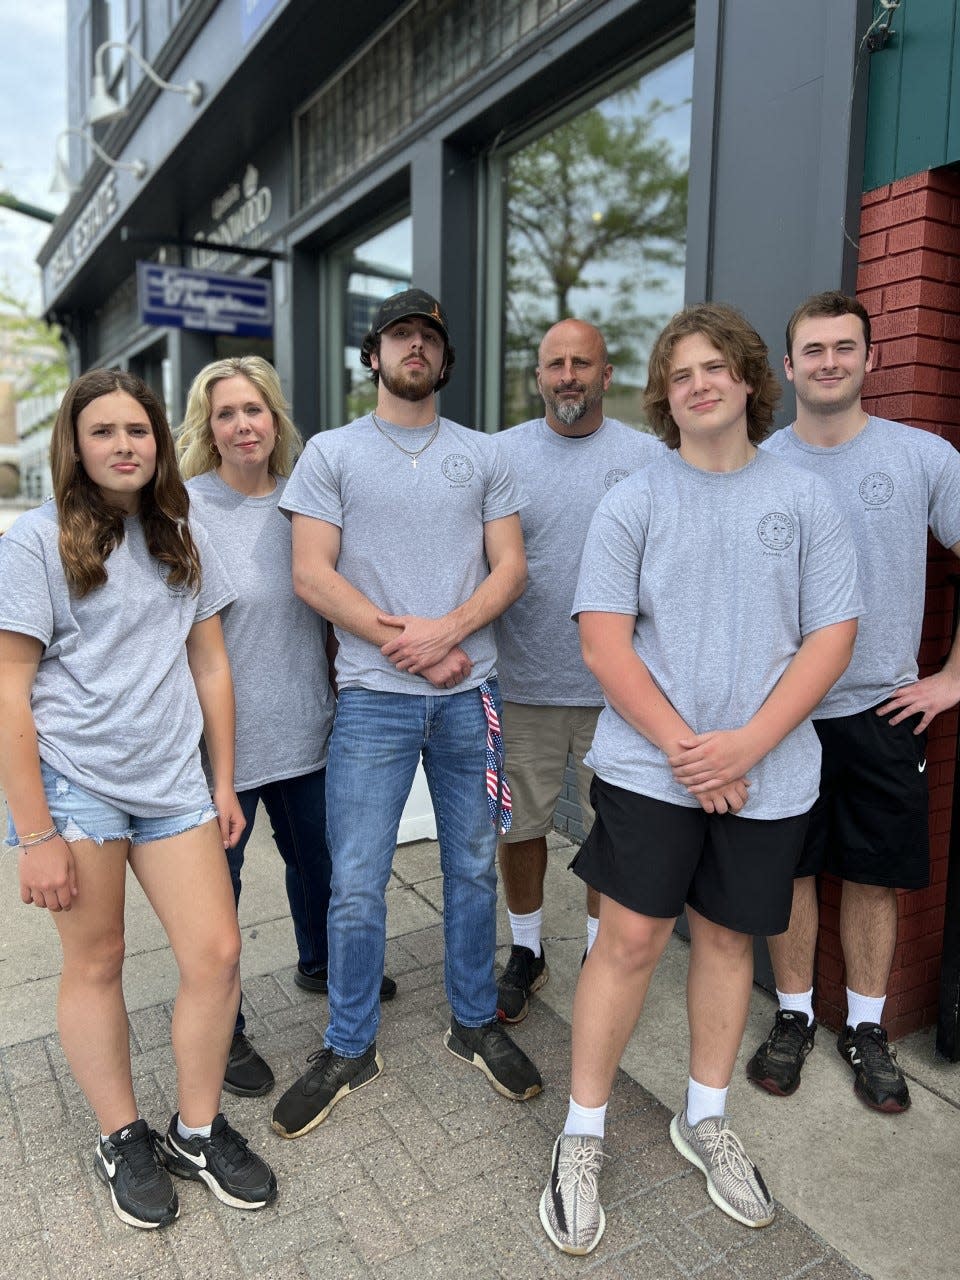 The Flynn family is celebrating 10 years of owning Mighty Fine Pizza at 222 E. Mitchell St. in Petoskey. Pictured (from left) are Lily Flynn, Ambre Flynn, Riley Flynn, Earl Flynn, Bradley Flynn and Garrett Flynn.